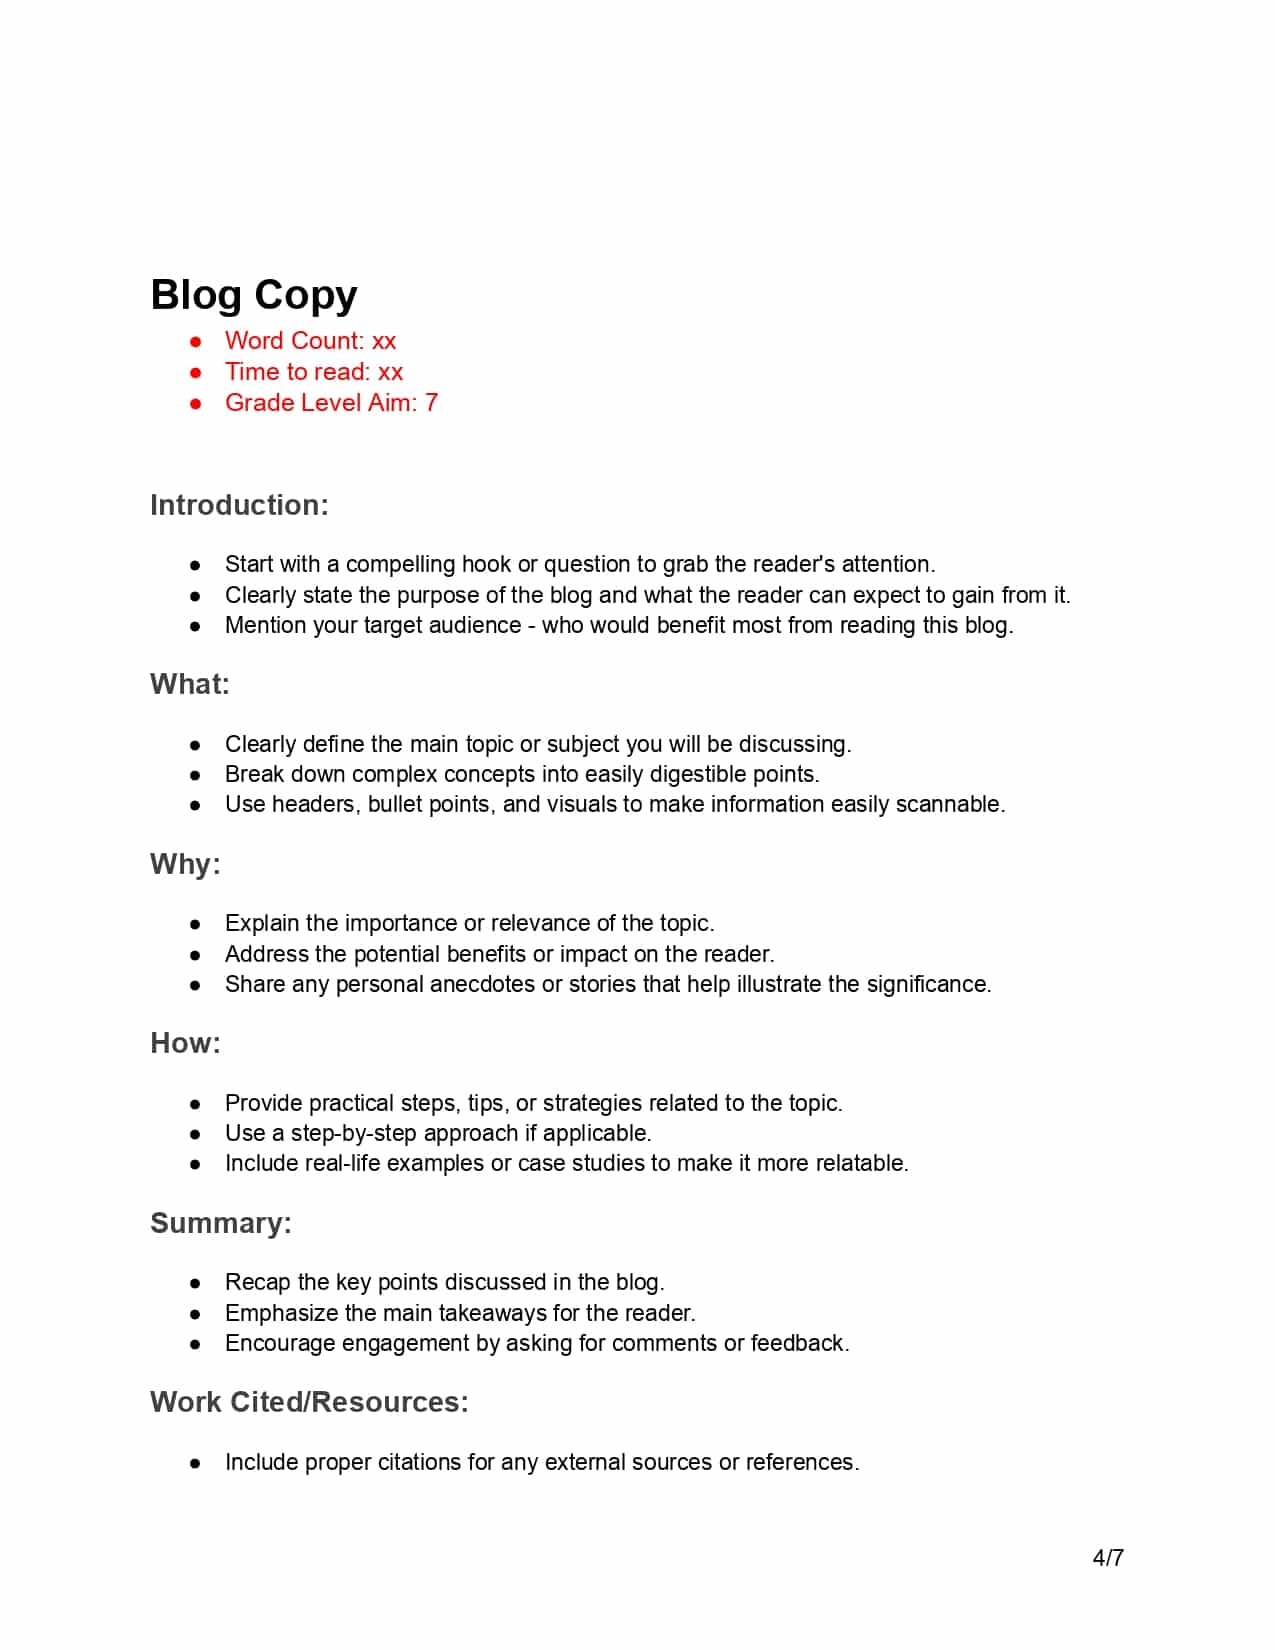 Blog Template - Example_page-0004